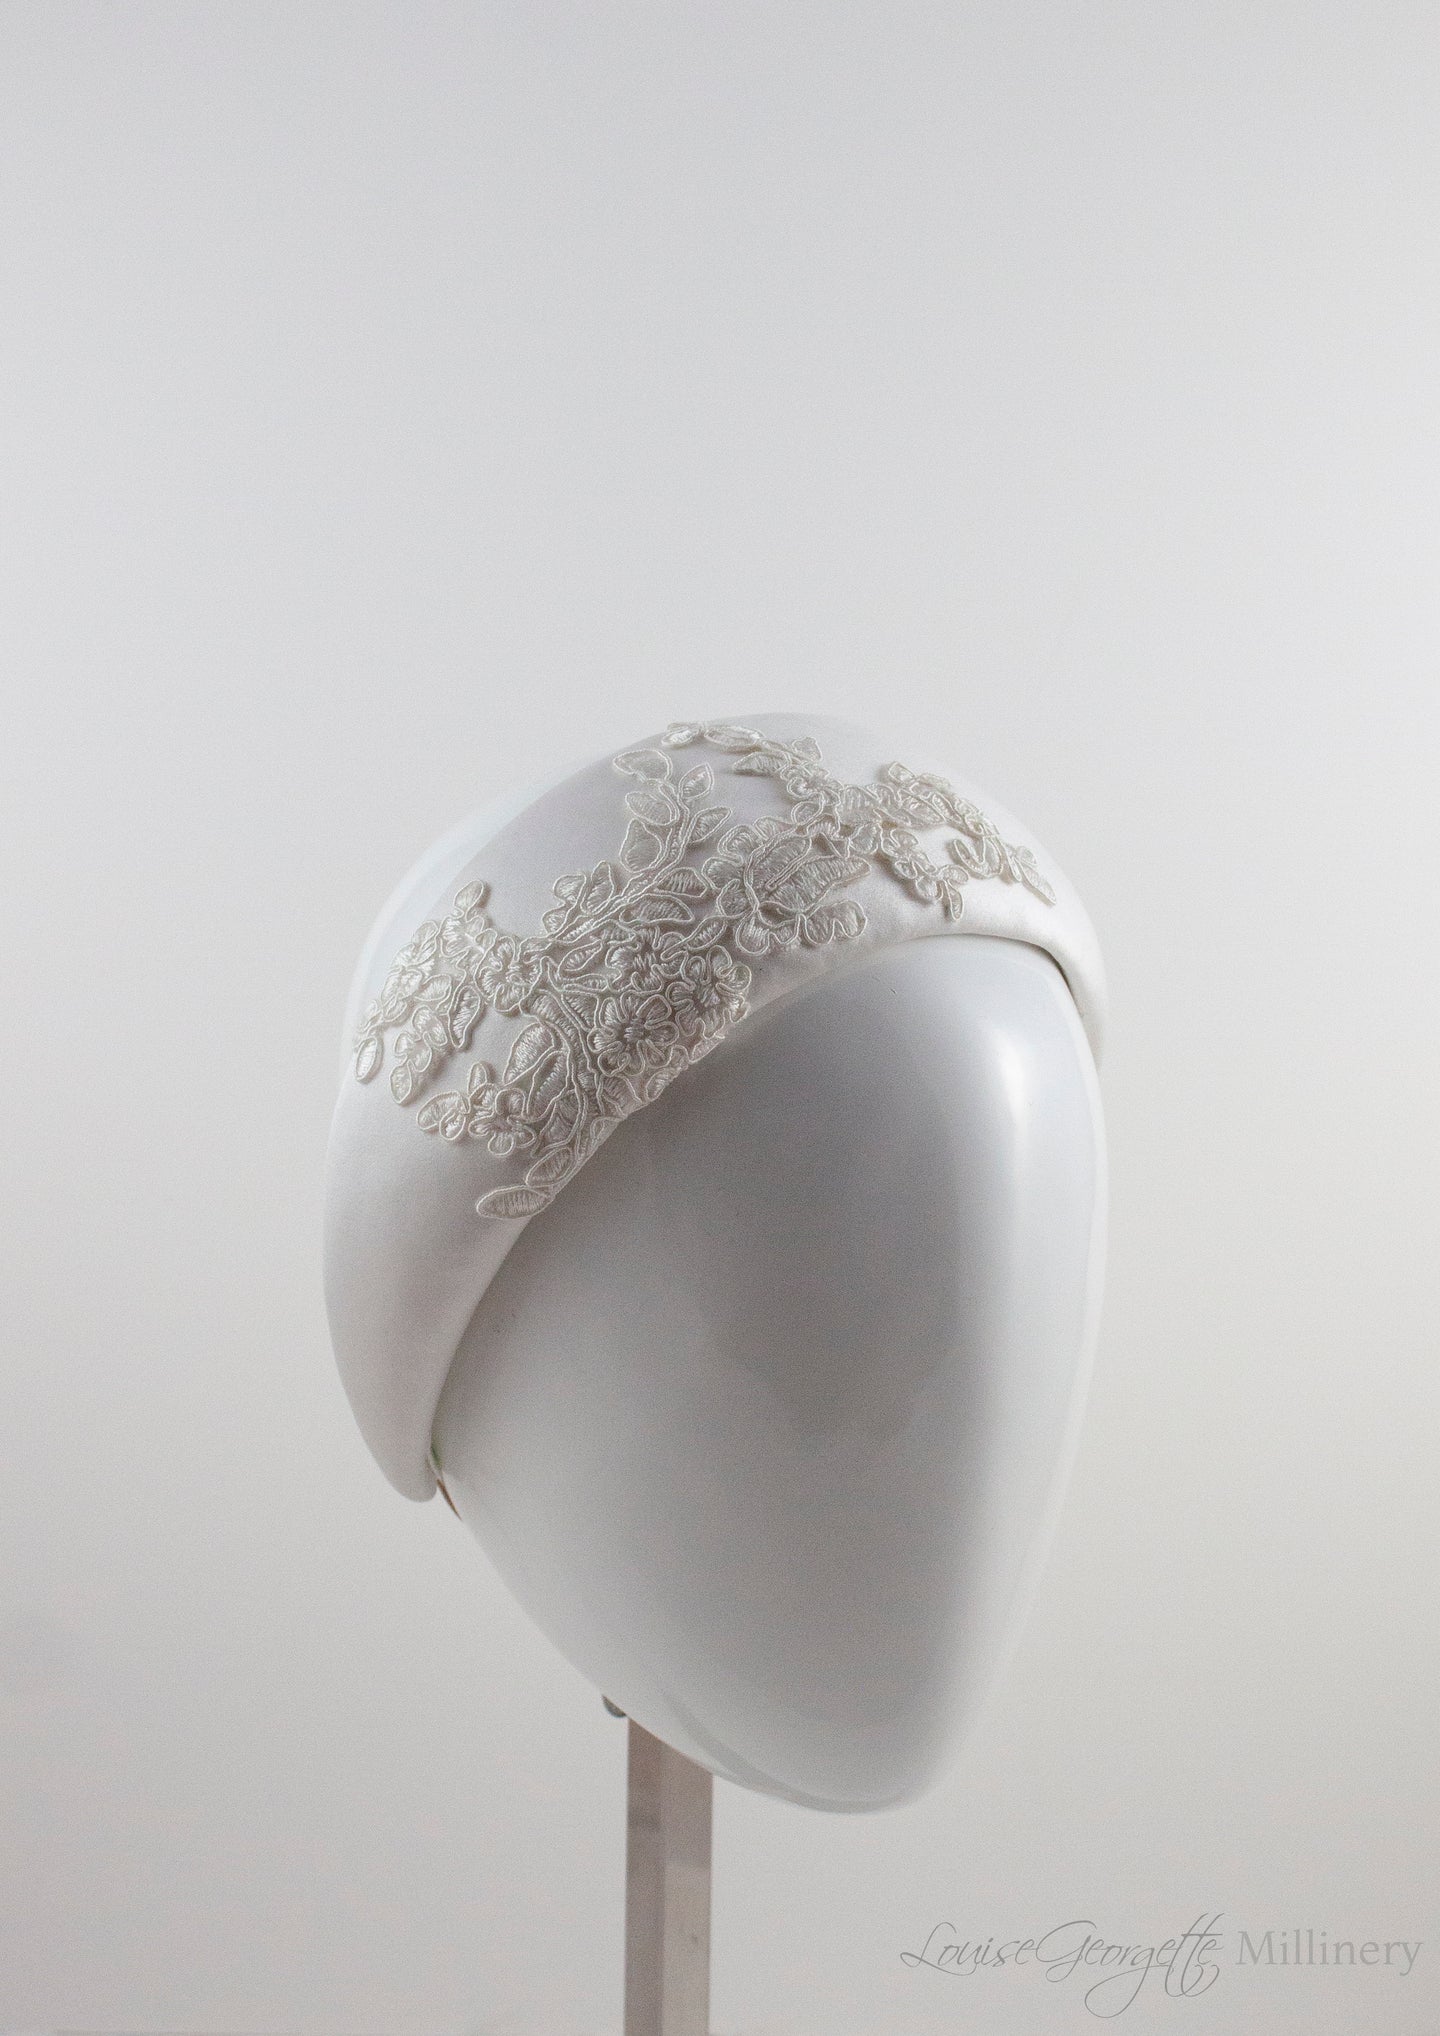 White Satin and Guipure Lace headnband. 3/4 view.